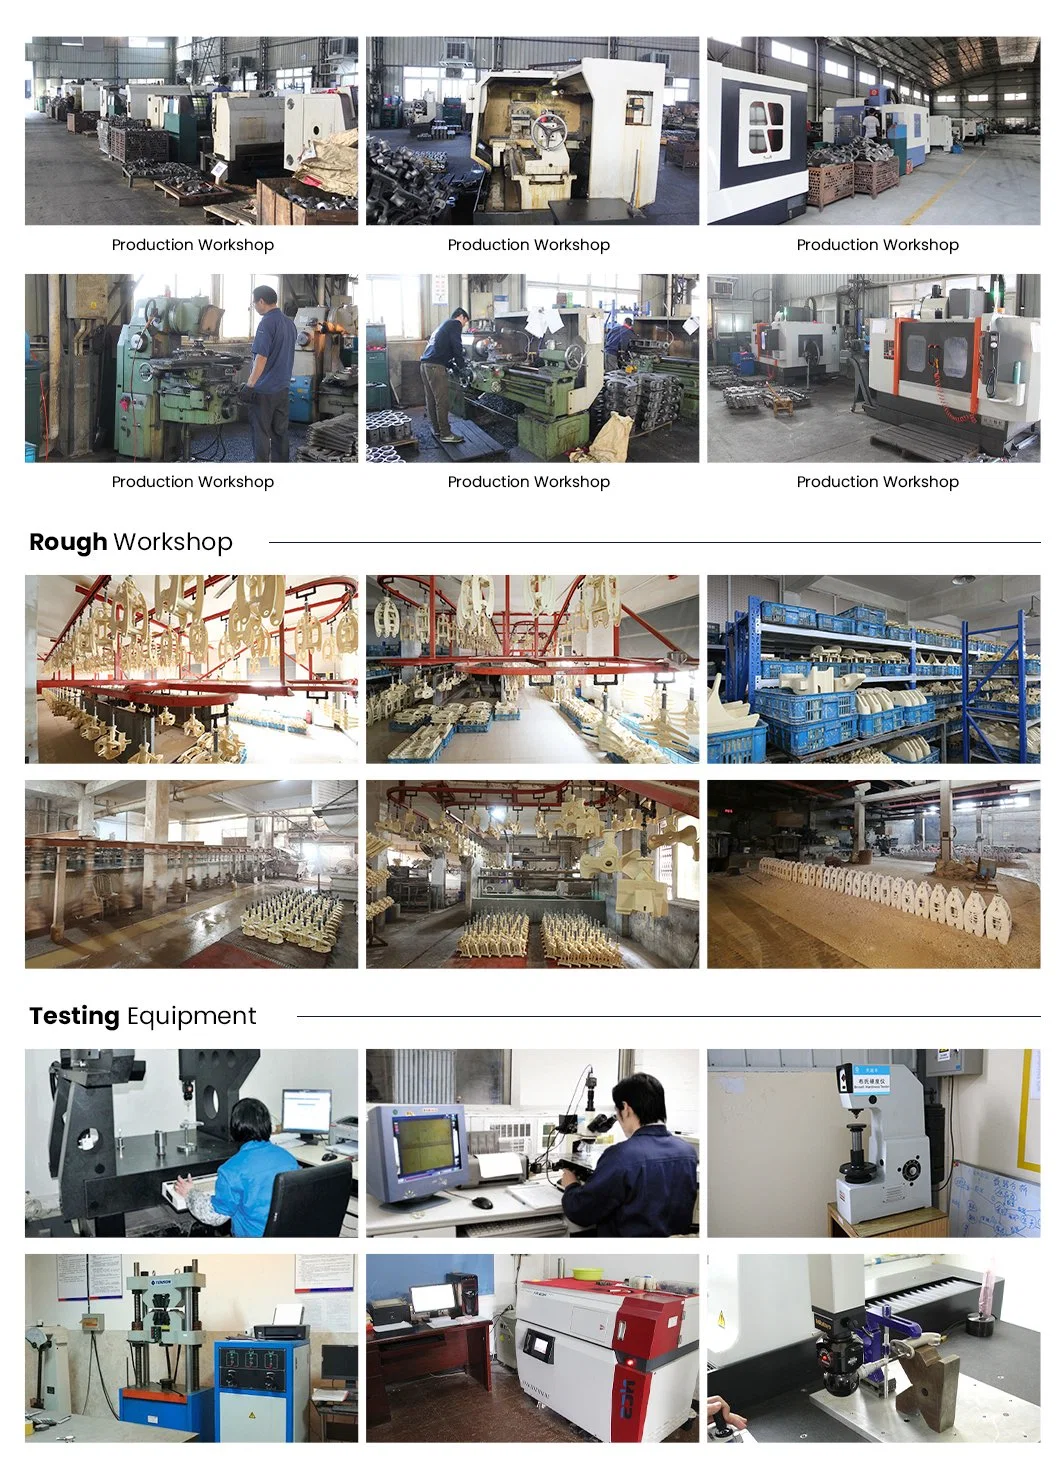 QS Machinery Precision Castings Inc Customized Investment Casting Service China Industrial Valve Investment Casting Parts